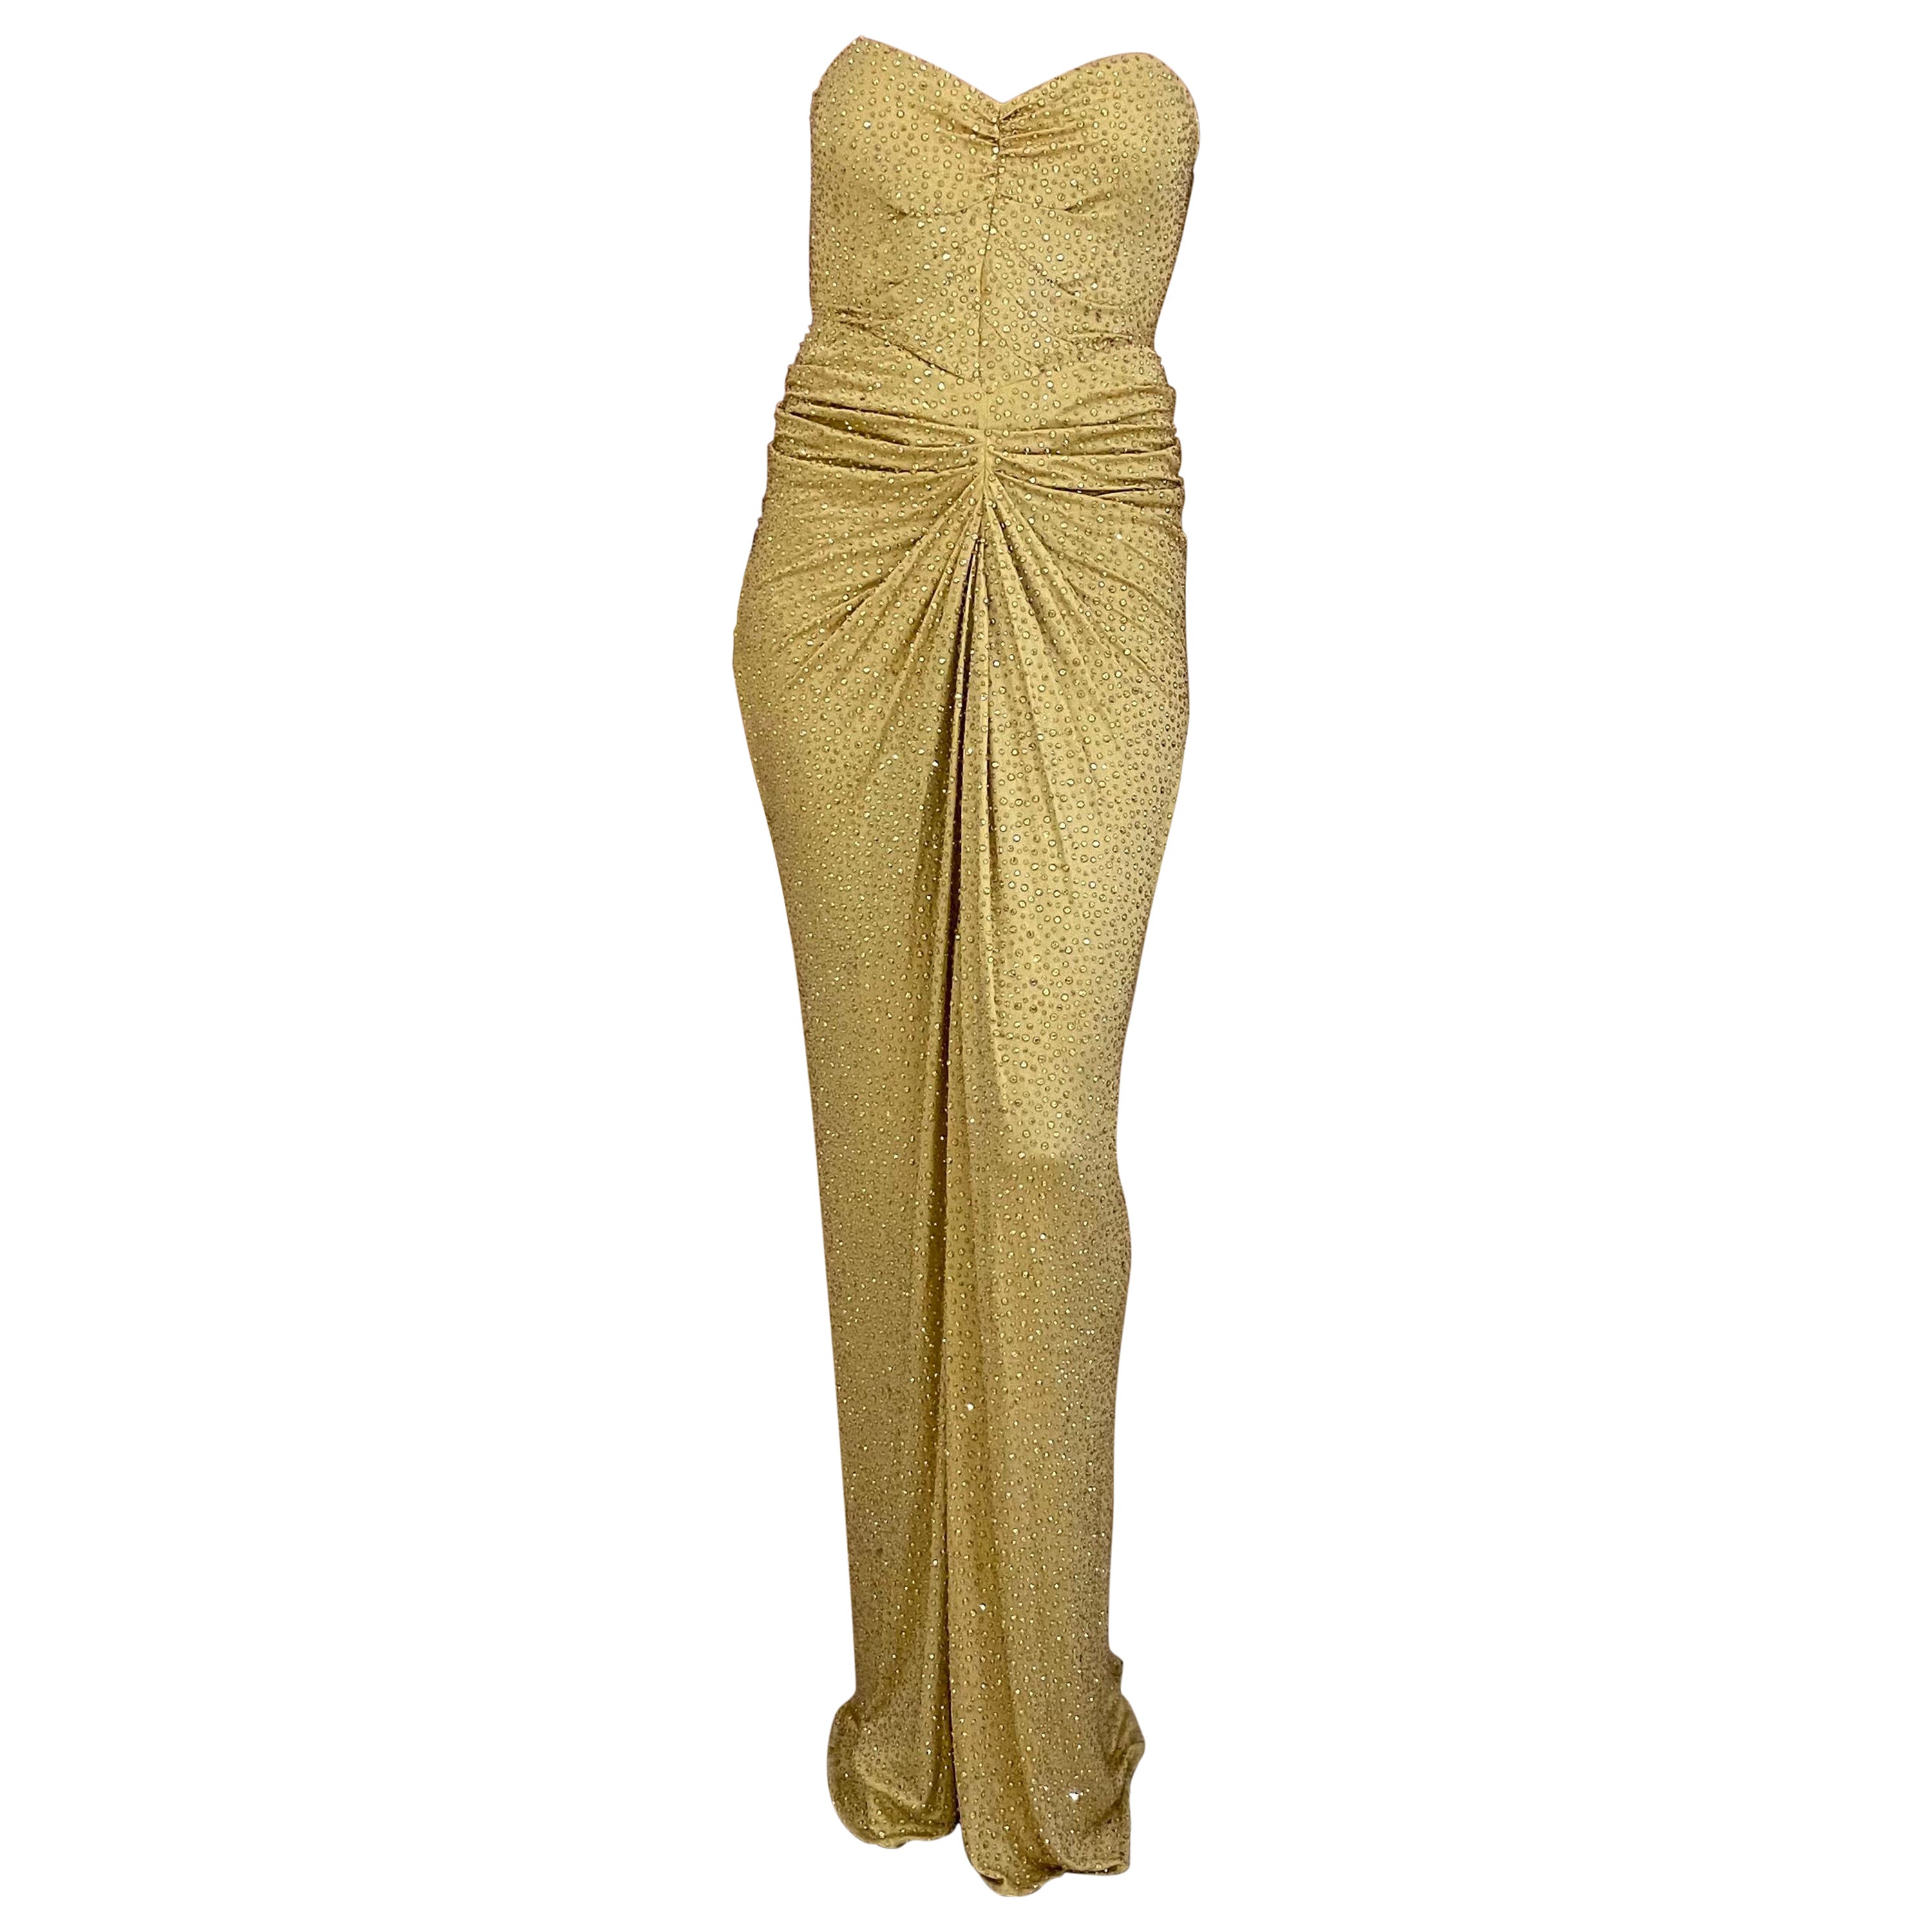 Michael Kors Gold Jersey Gown with Rhinestones 